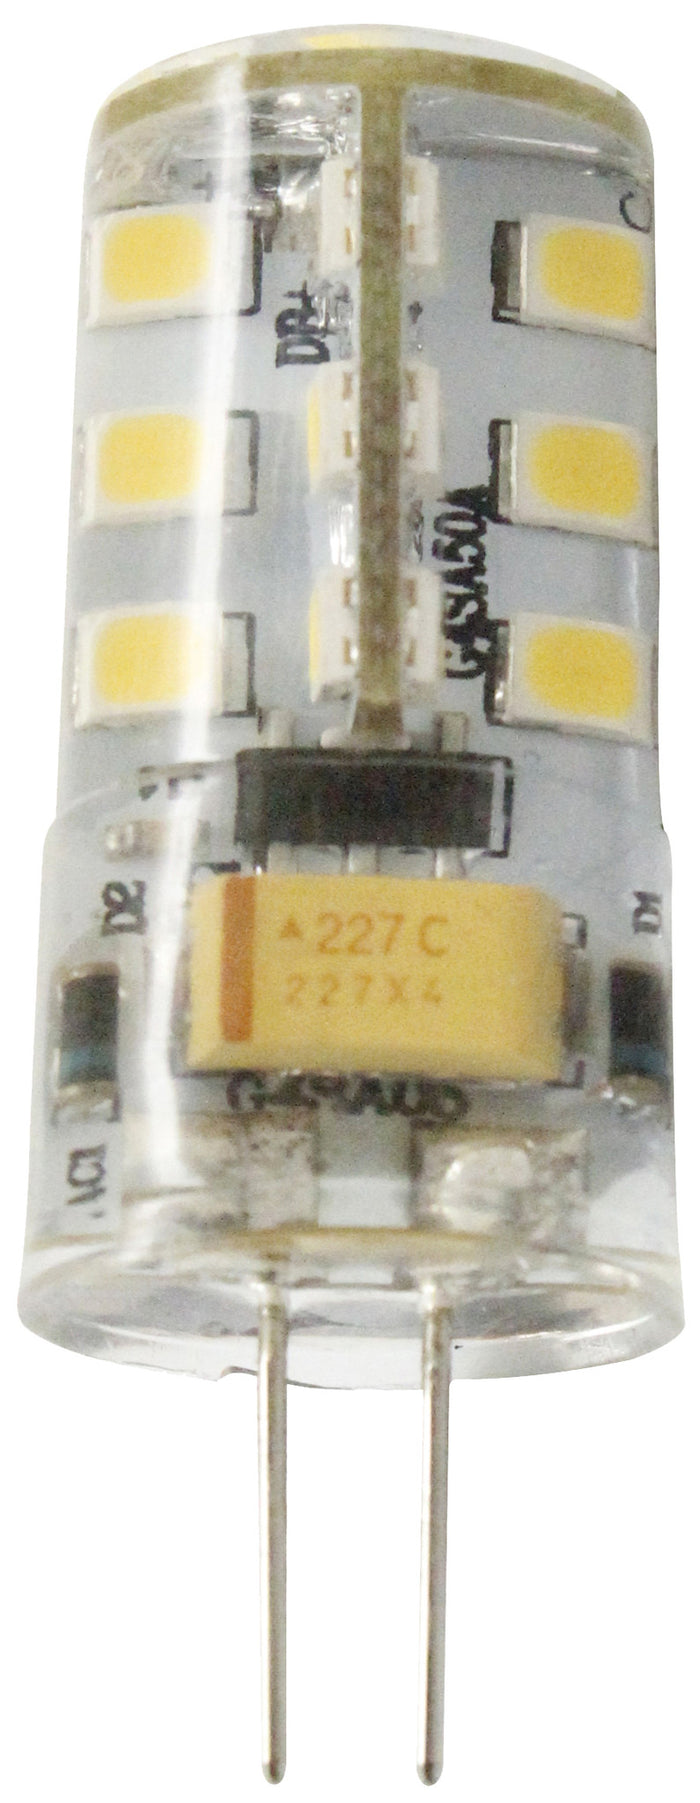 161163 - Specific LED G4 3W 3000K 220Lm